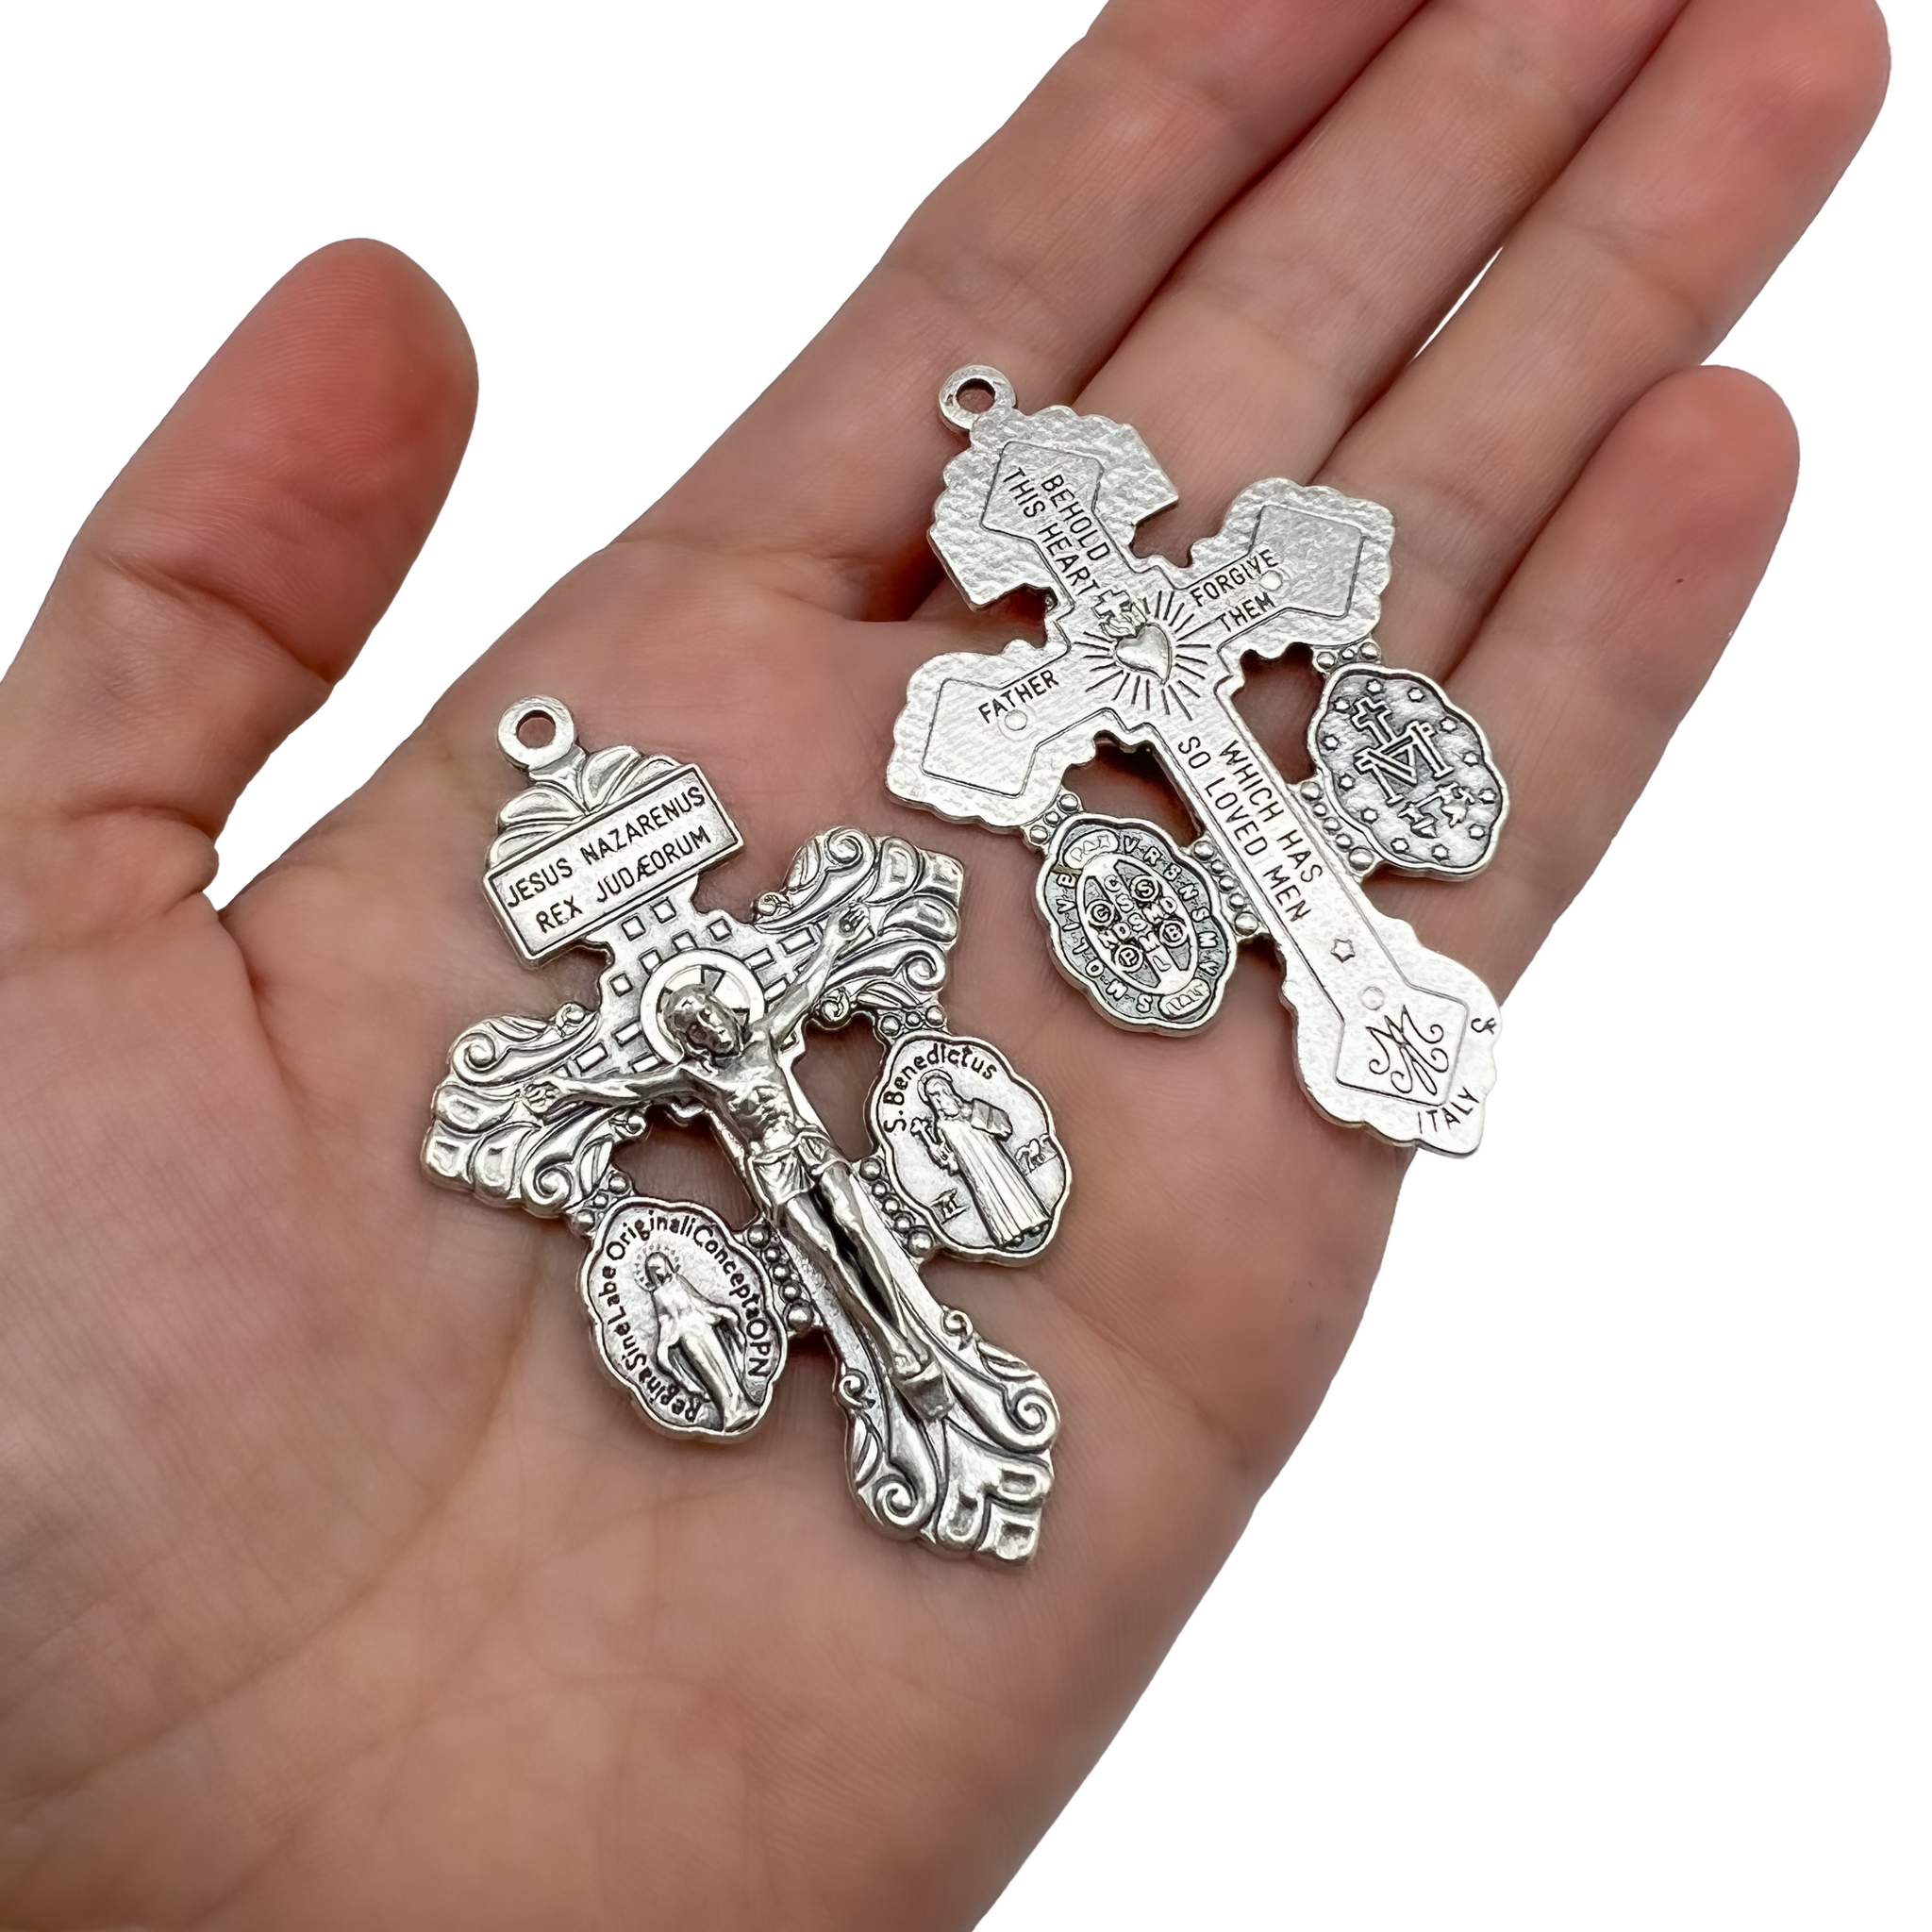 Bulk Pack of 25 - Pardon Indulgence Crucifix Triple Threat Crucifix Cross  for Rosary Making with St Benedict Medal and Miraculous Medal - 2 1/8 Inch  Silver Oxidized Italian Crucifix Catholic Rosary Making Supplies